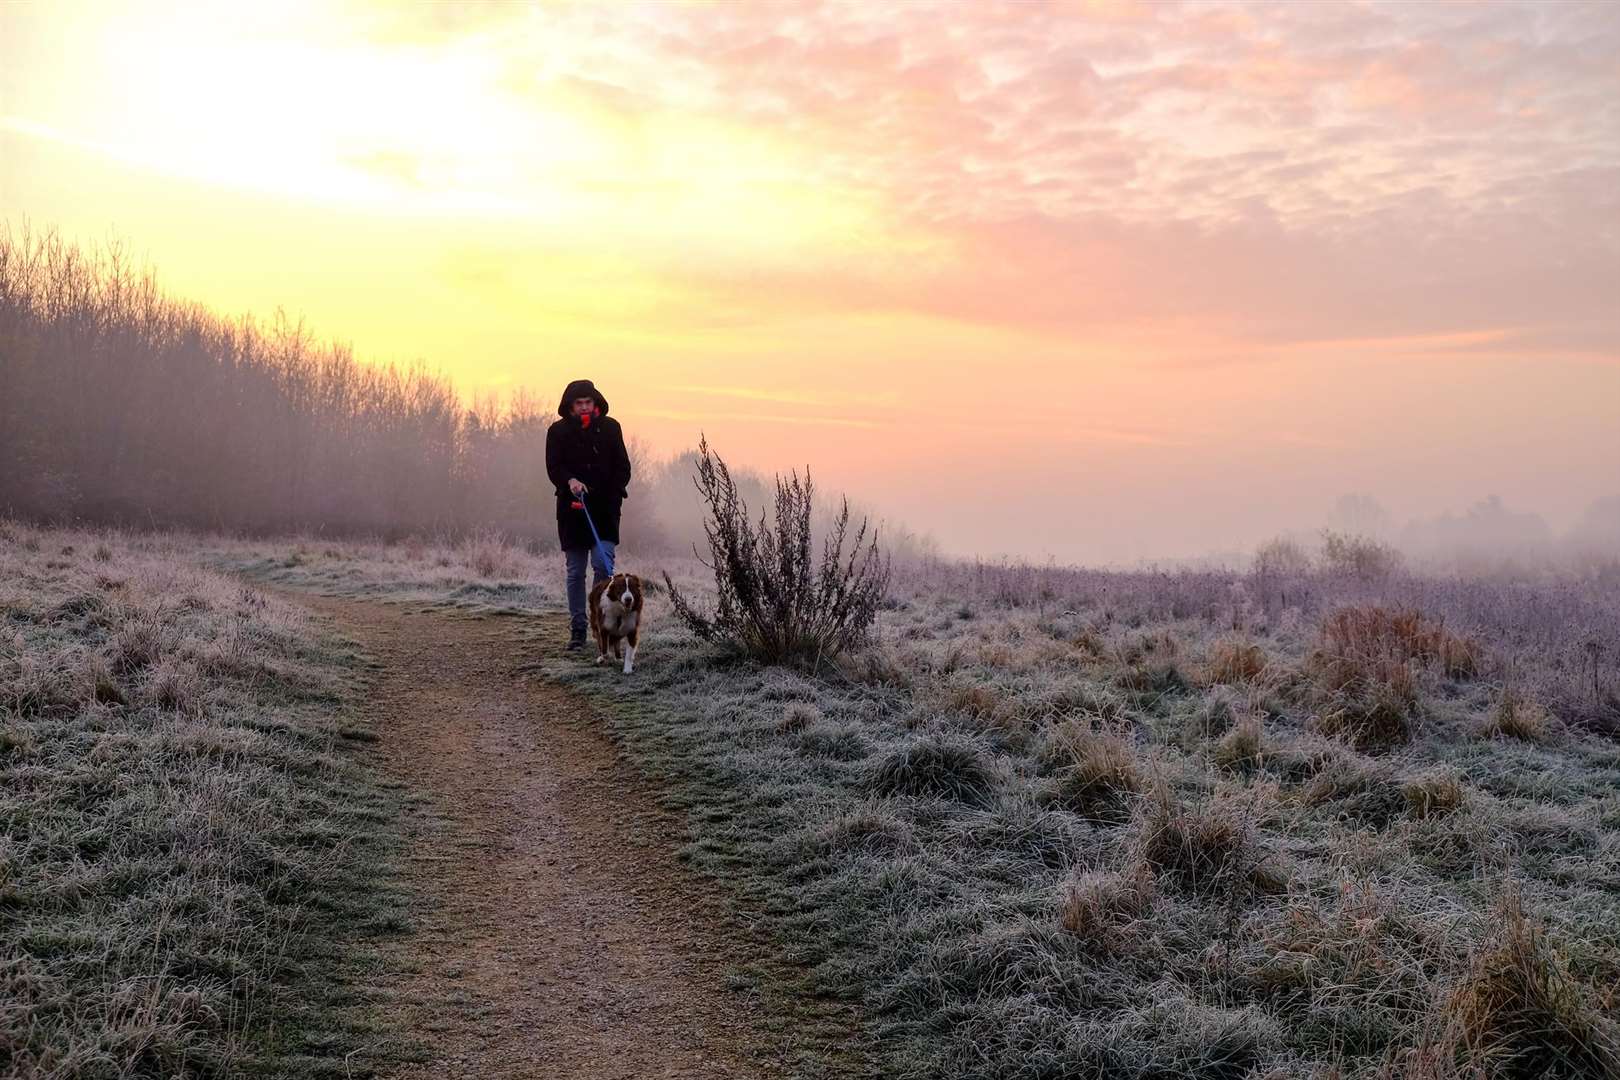 Kent woke up to a frosty start this morning and temperatures are forecast to stay low